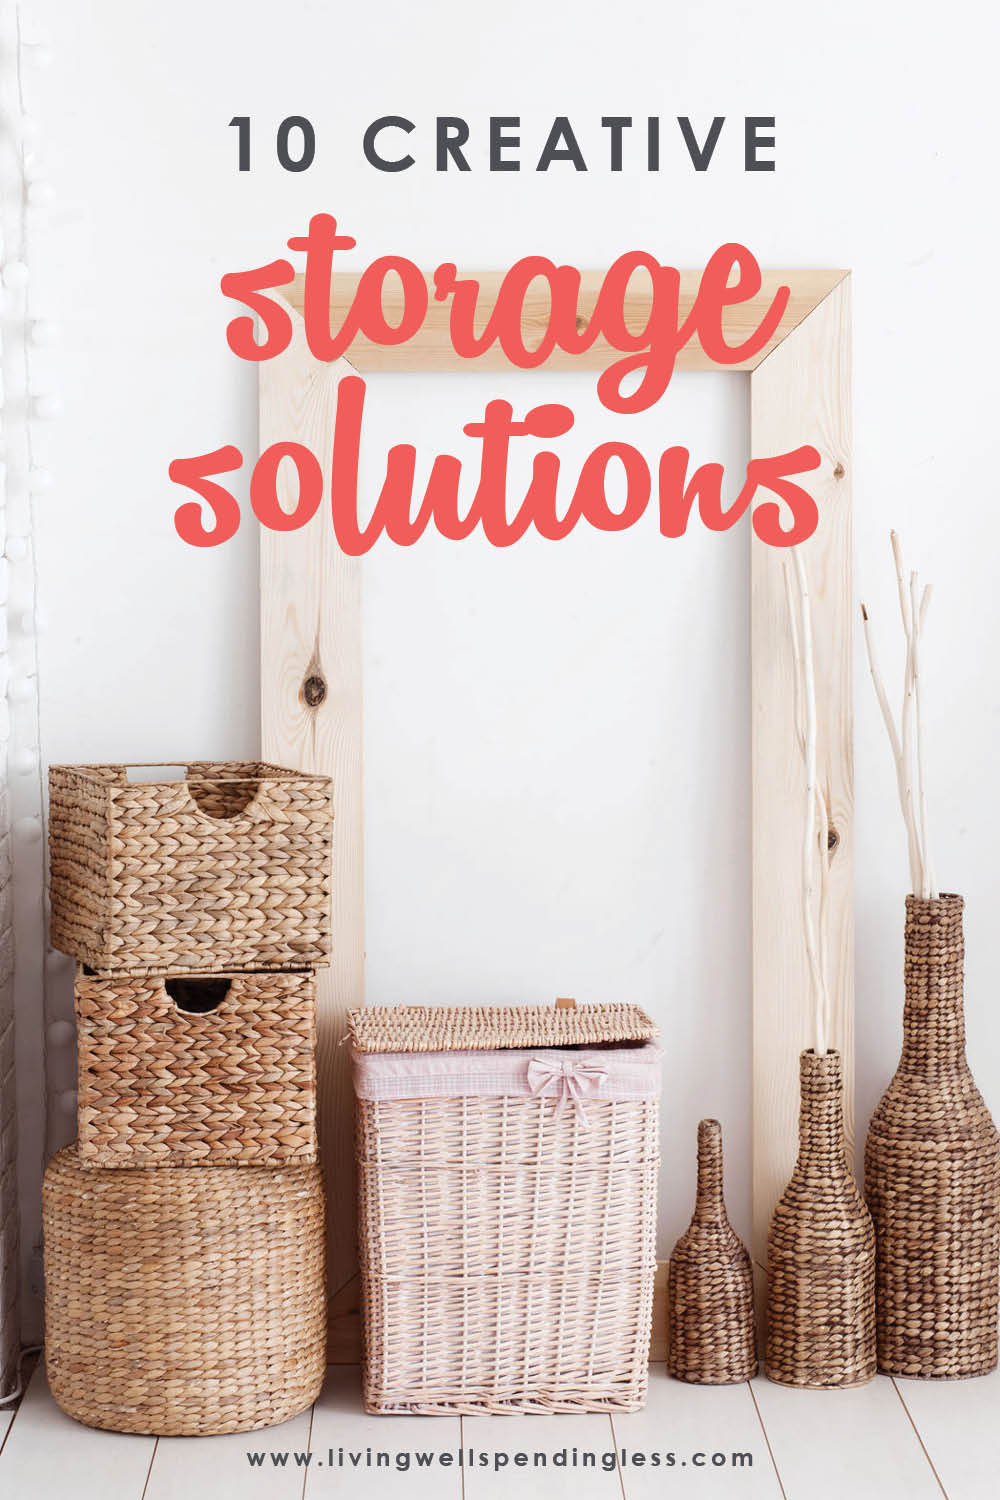 Need more space for your stuff? Use these creative storage solutions to maximize organization within your home and declutter! #declutter #organization #organizationalhacks #storagesolutions #maximizespace #tinyliving #storage